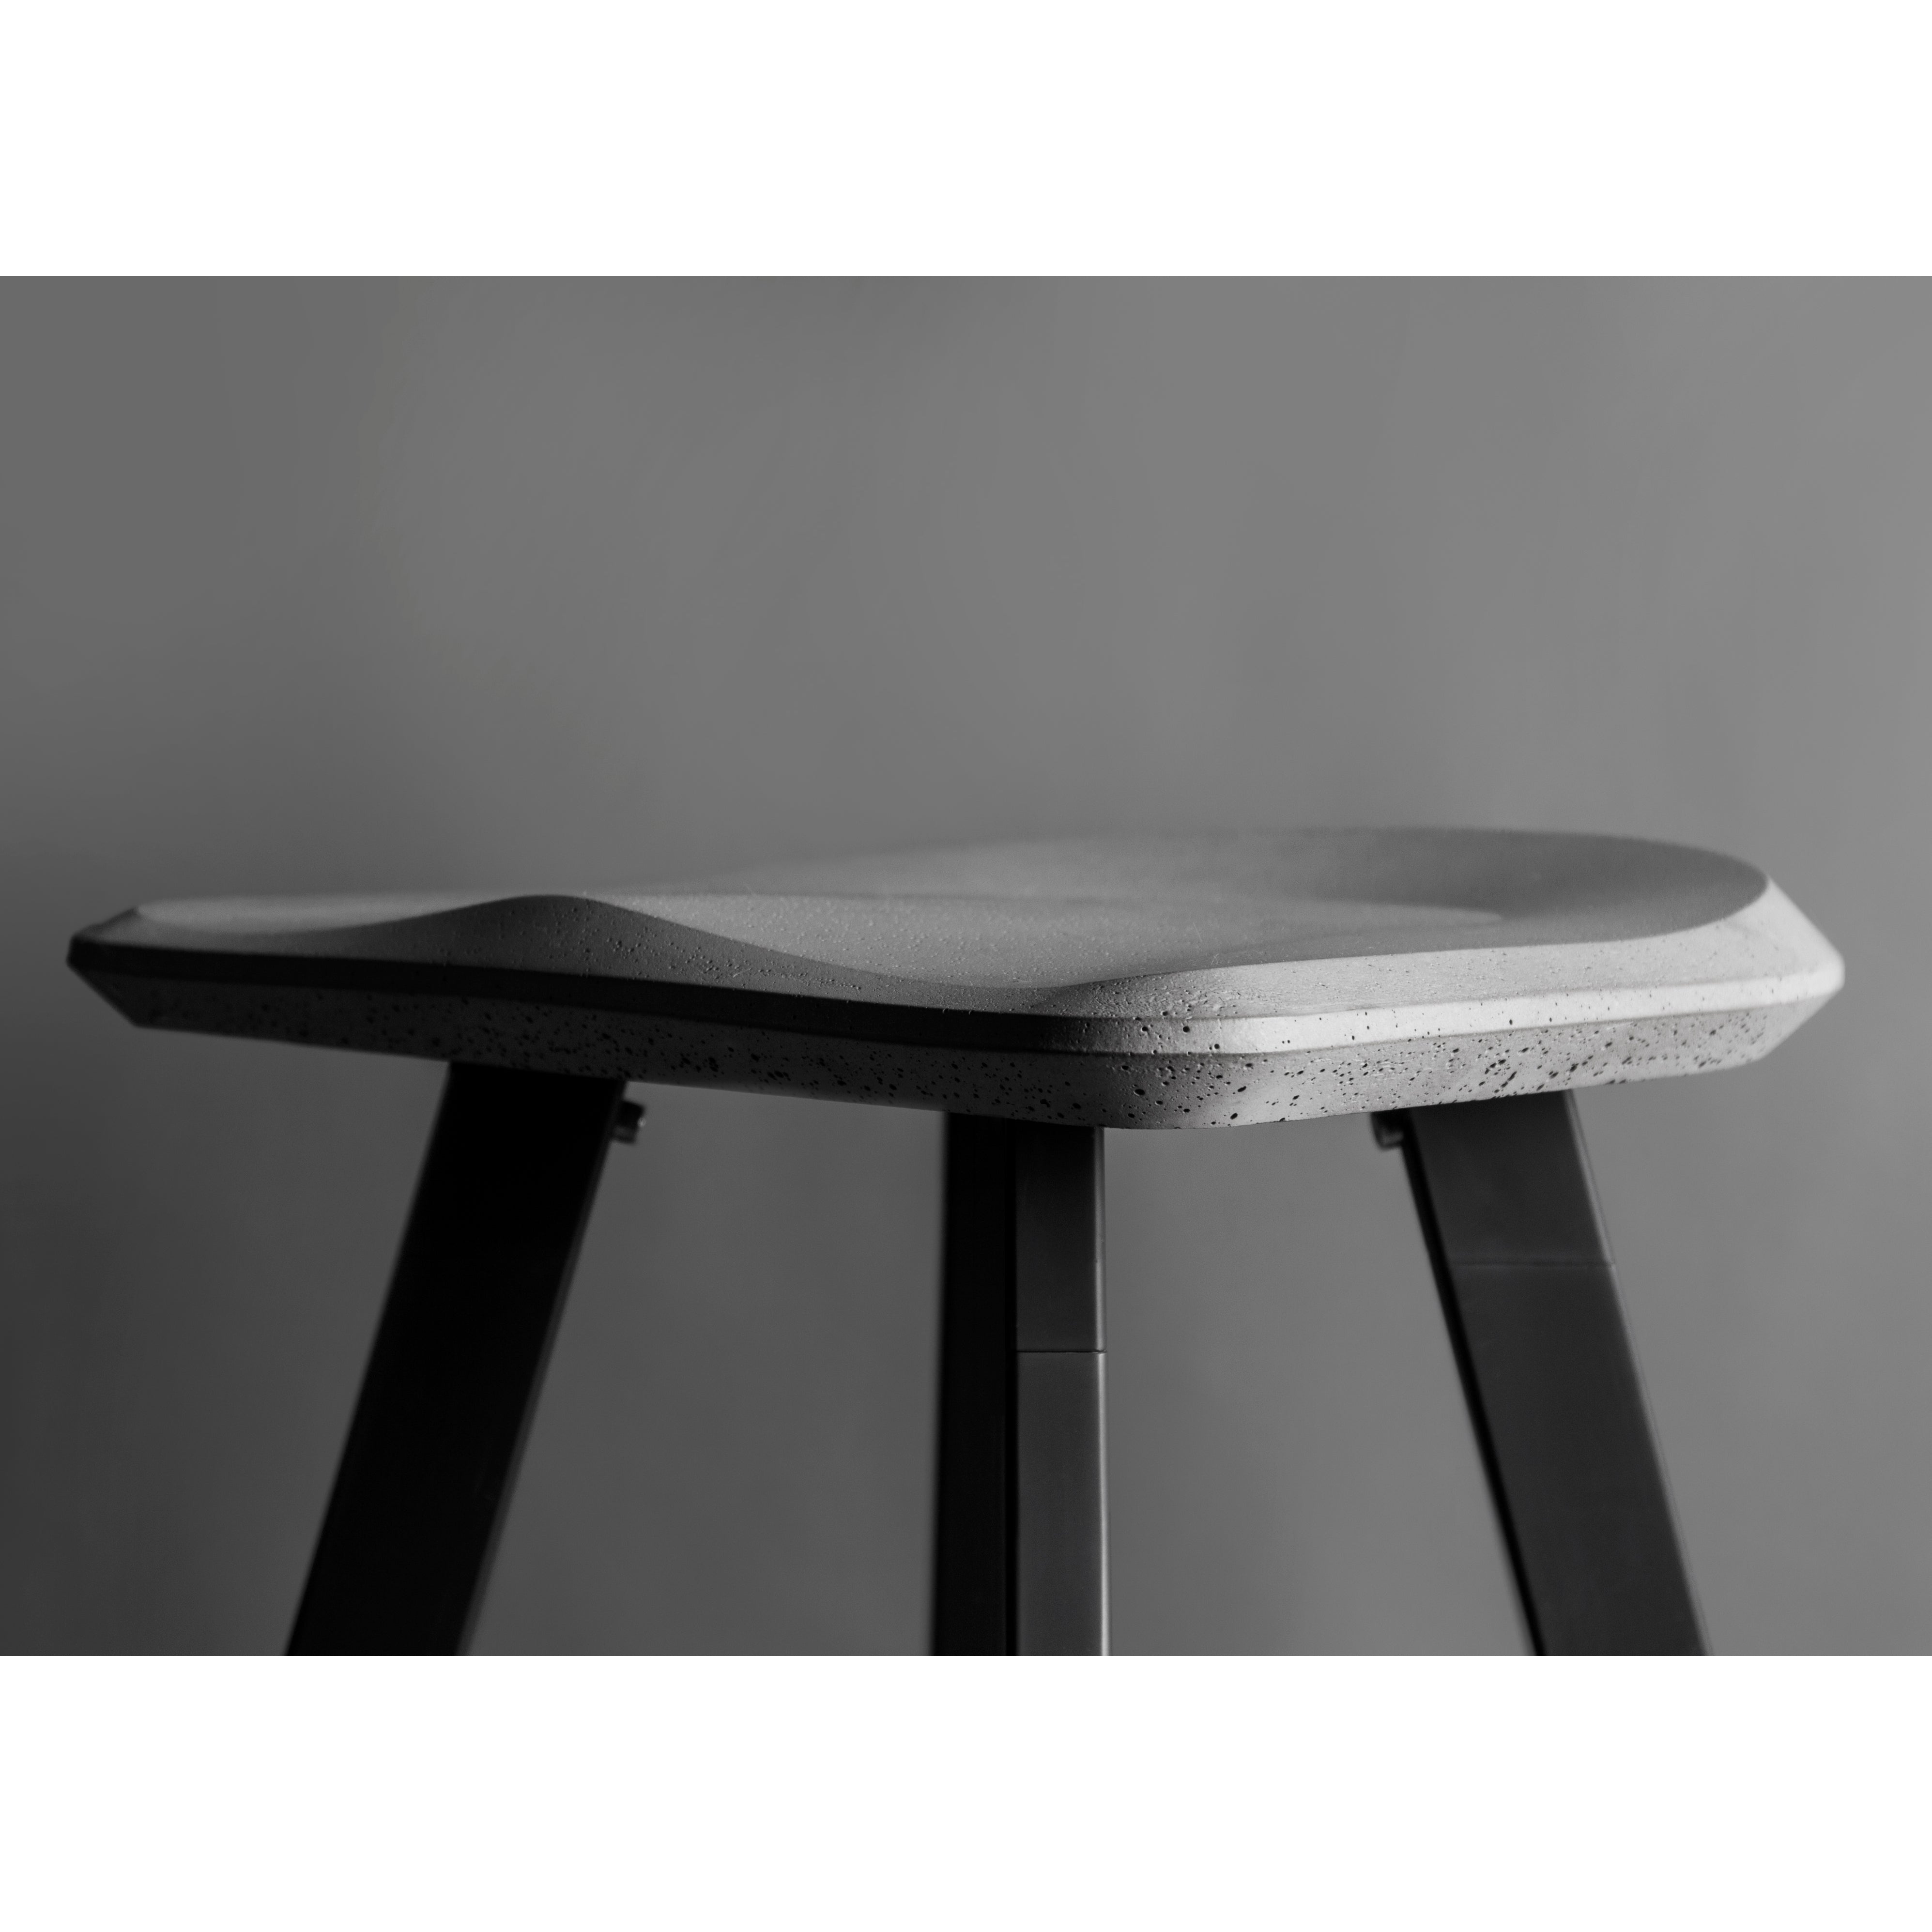 A - Low/High Stool